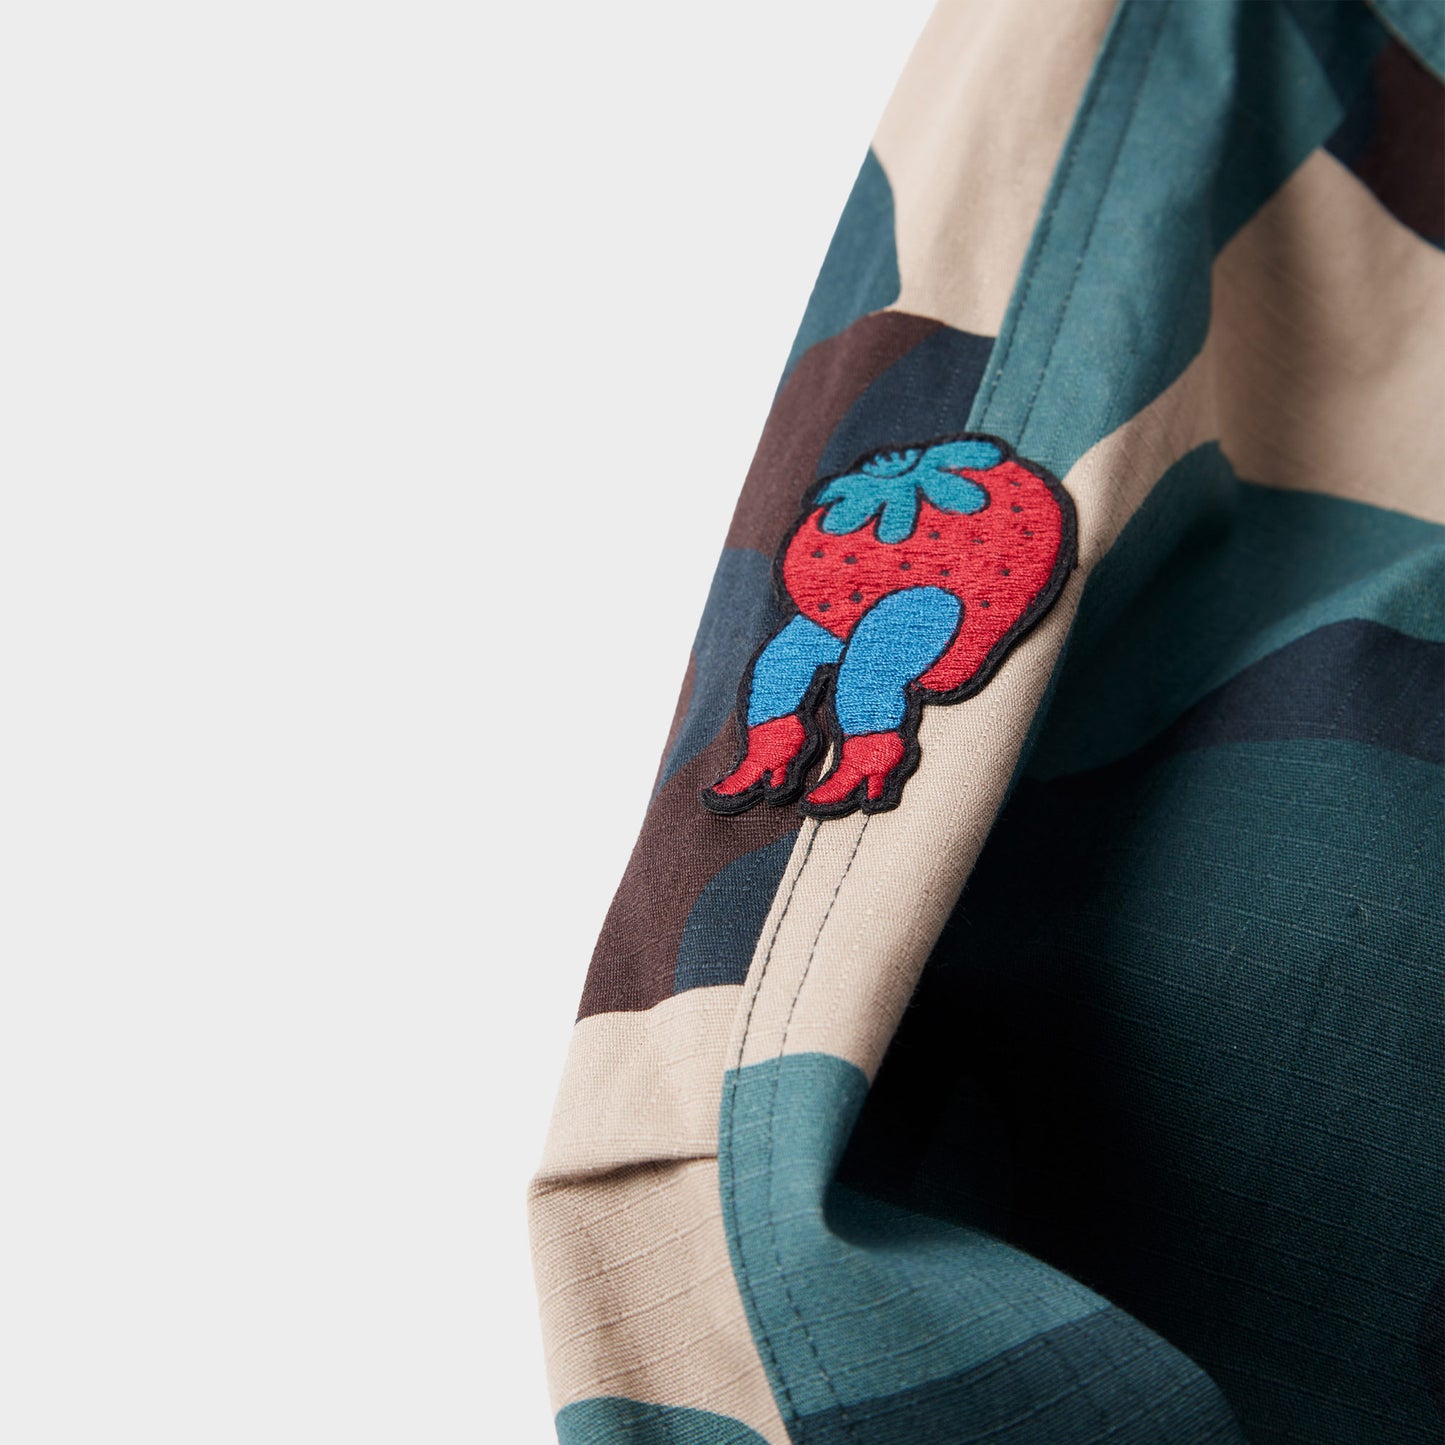 byParra Distorted Camo Jacket in der Farbe green